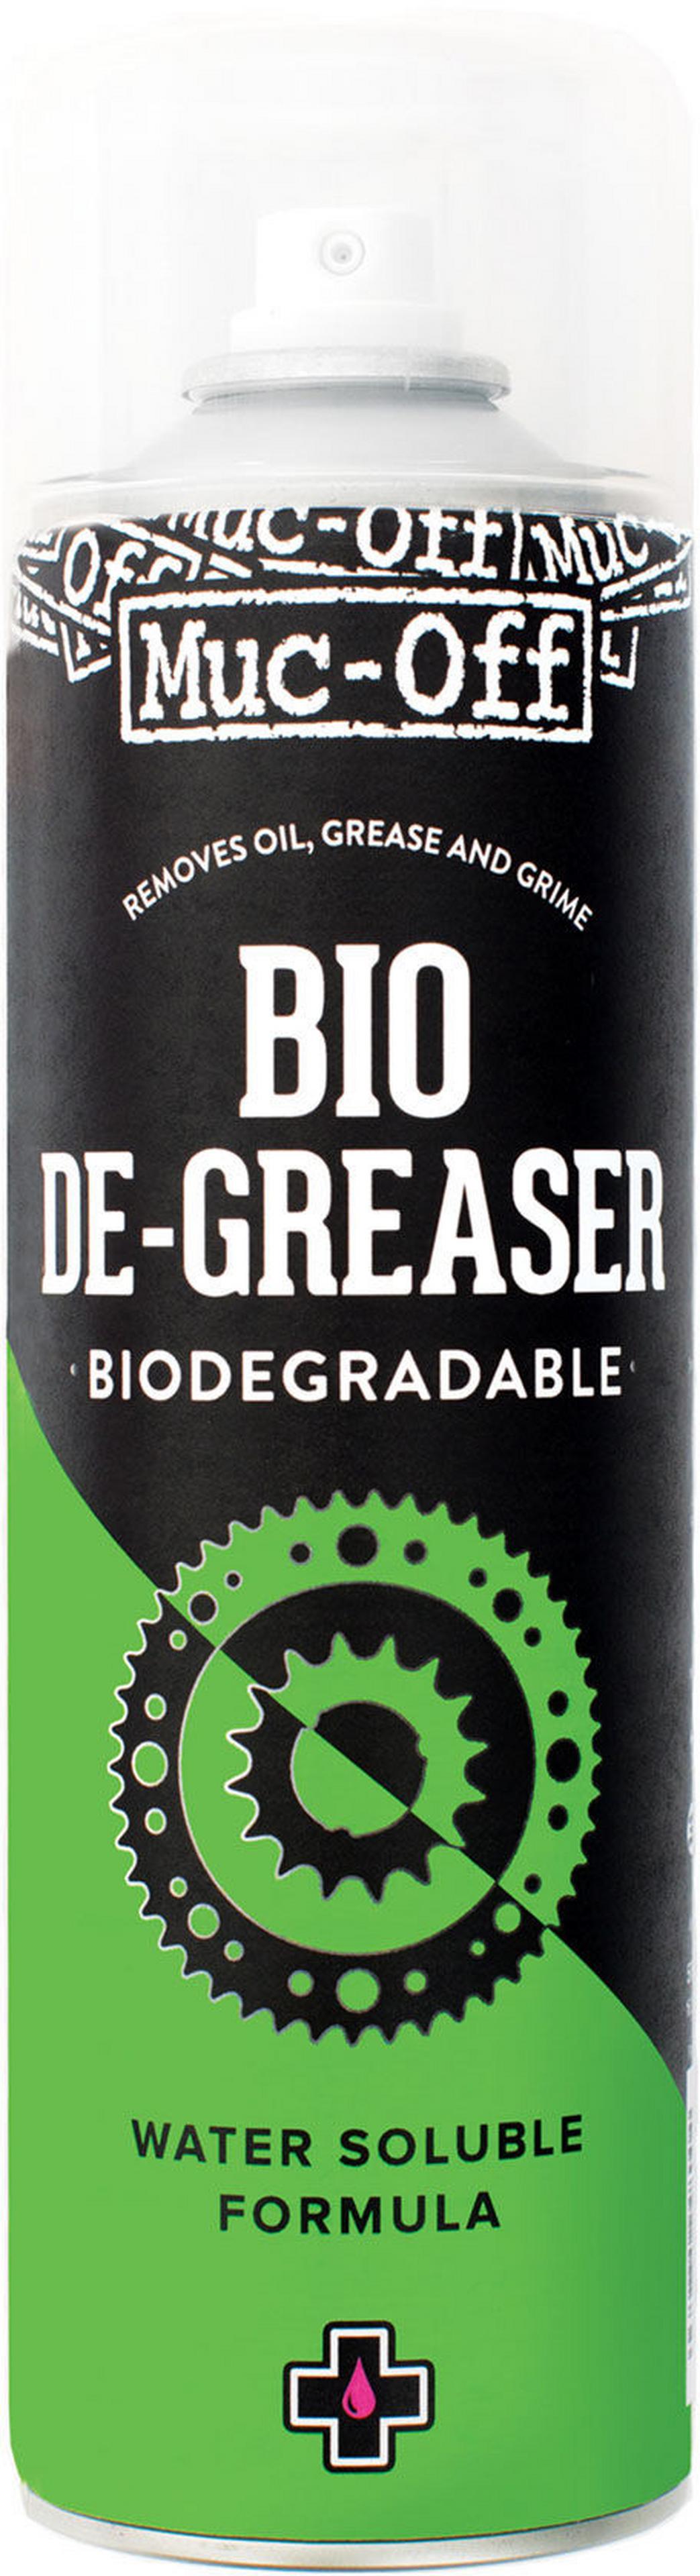 Runaway Bike DEGREASER. A Low-Odor, bio-Friendly degreaser formulated for  use in Bike Chain Cleaner and scrubbing Tools.